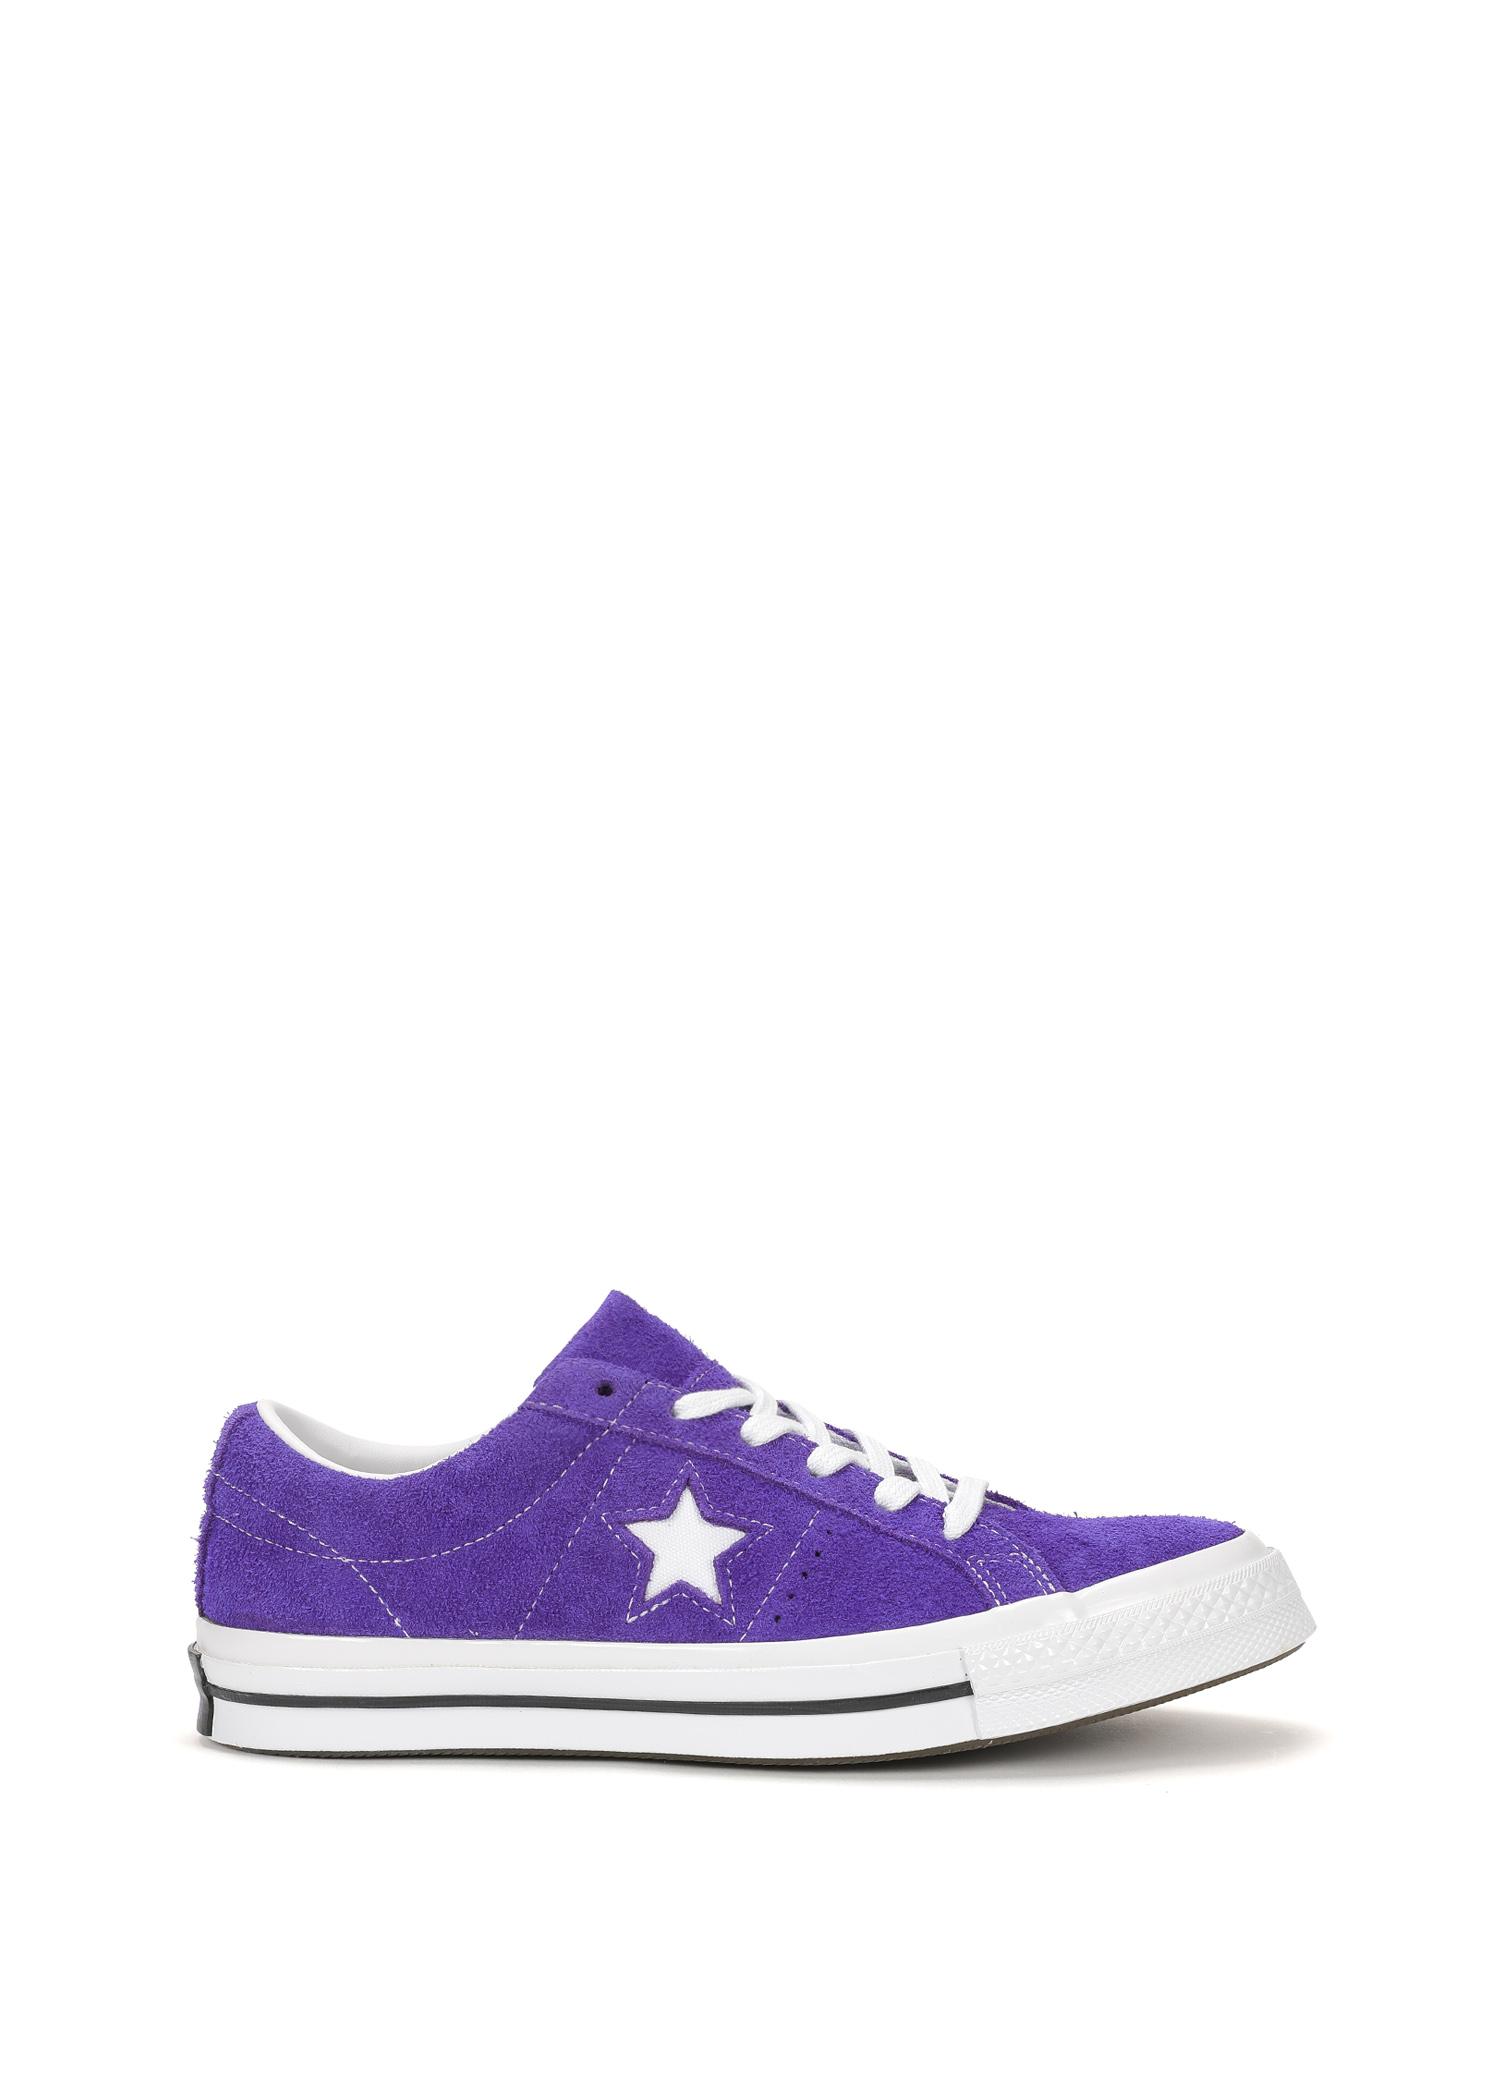 Converse One Star Ox In Court Purple 